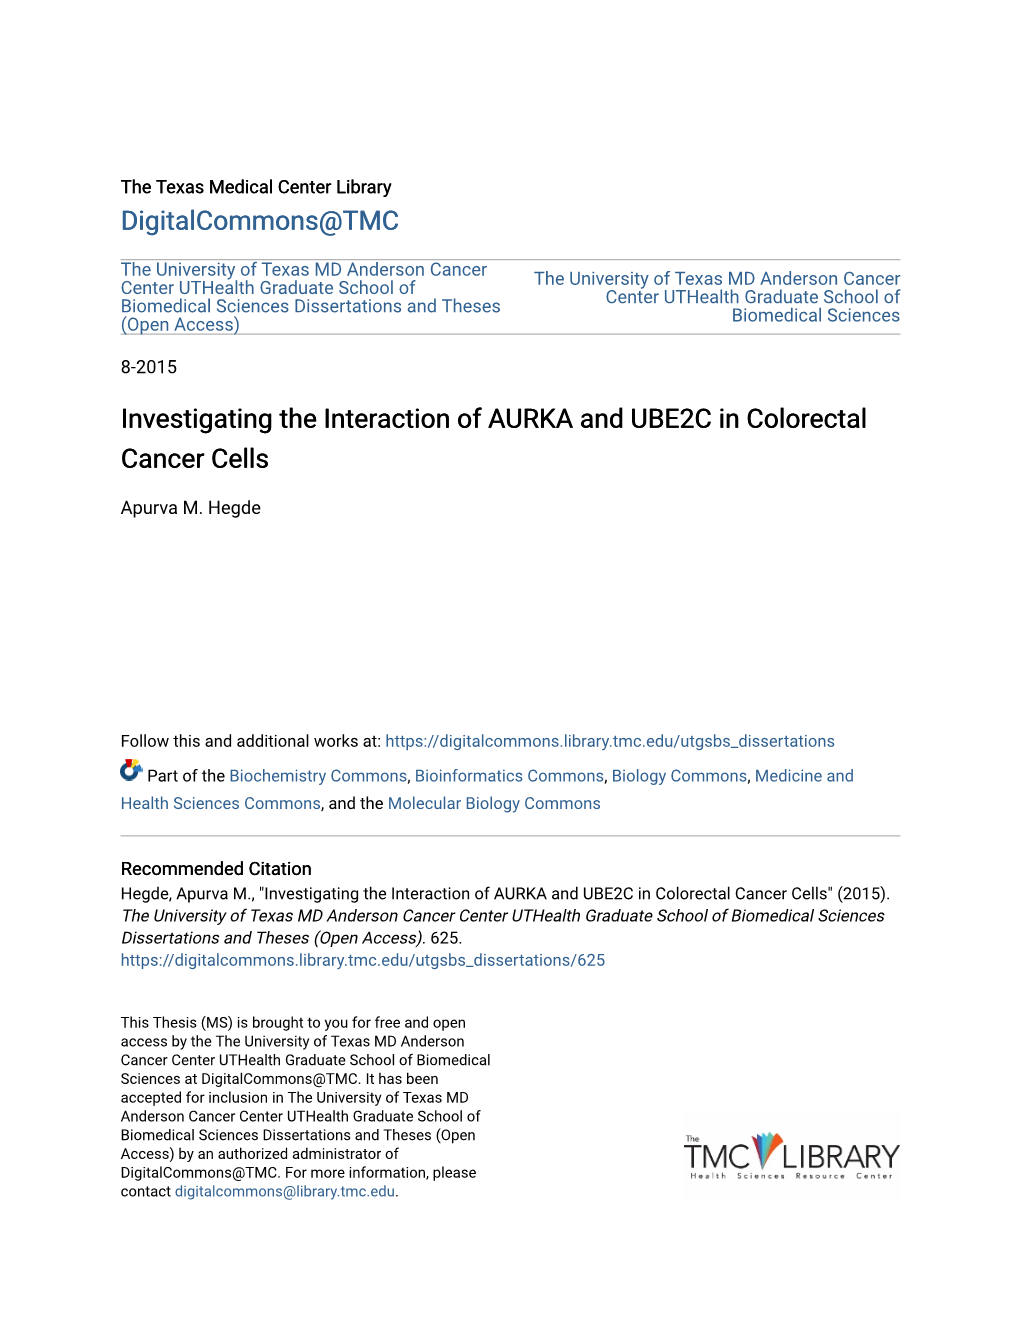 Investigating the Interaction of AURKA and UBE2C in Colorectal Cancer Cells